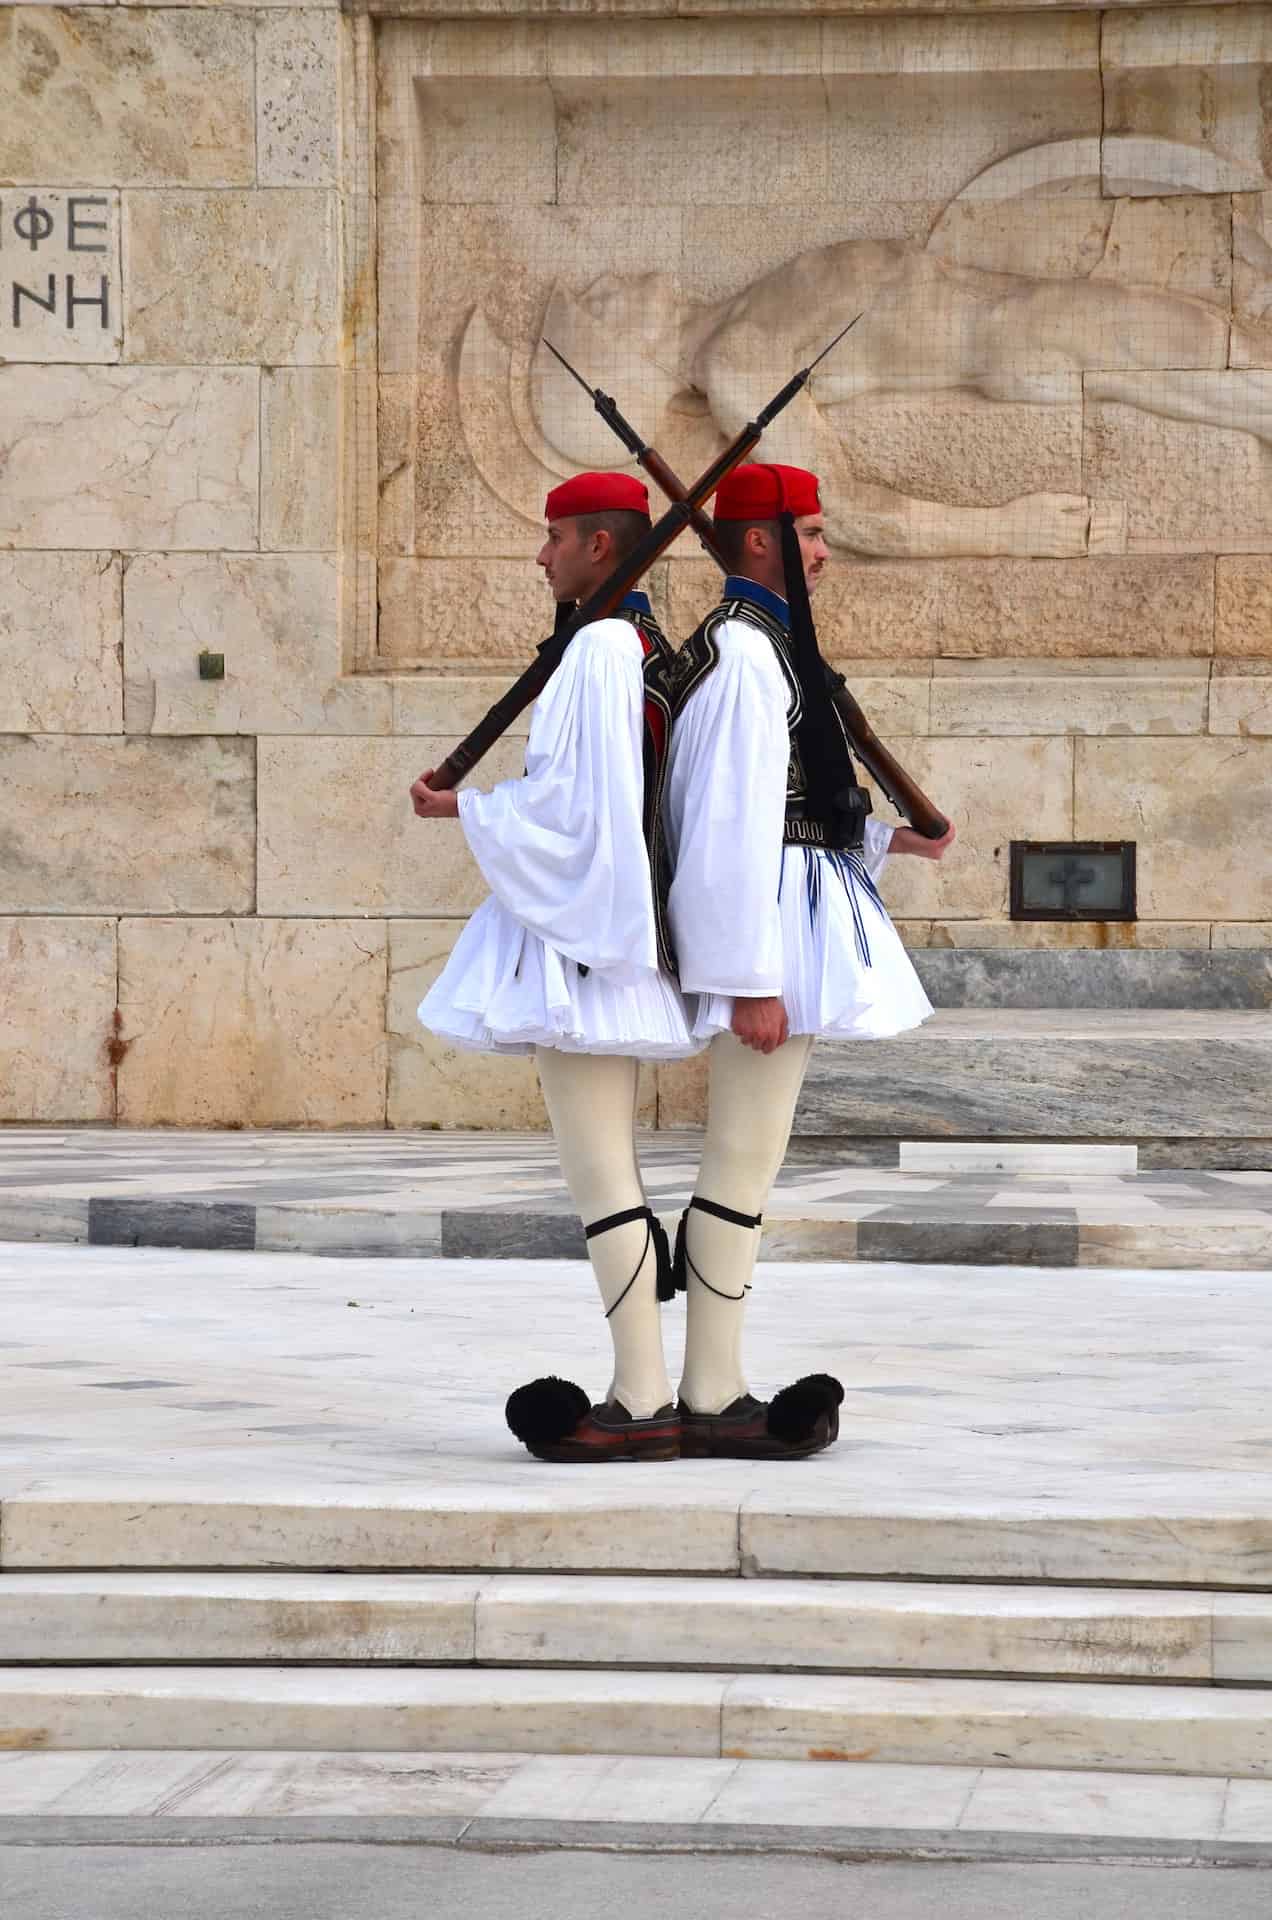 Evzones in formal Sunday uniforms at the Tomb of the Unknown Soldier in Athens, Greece